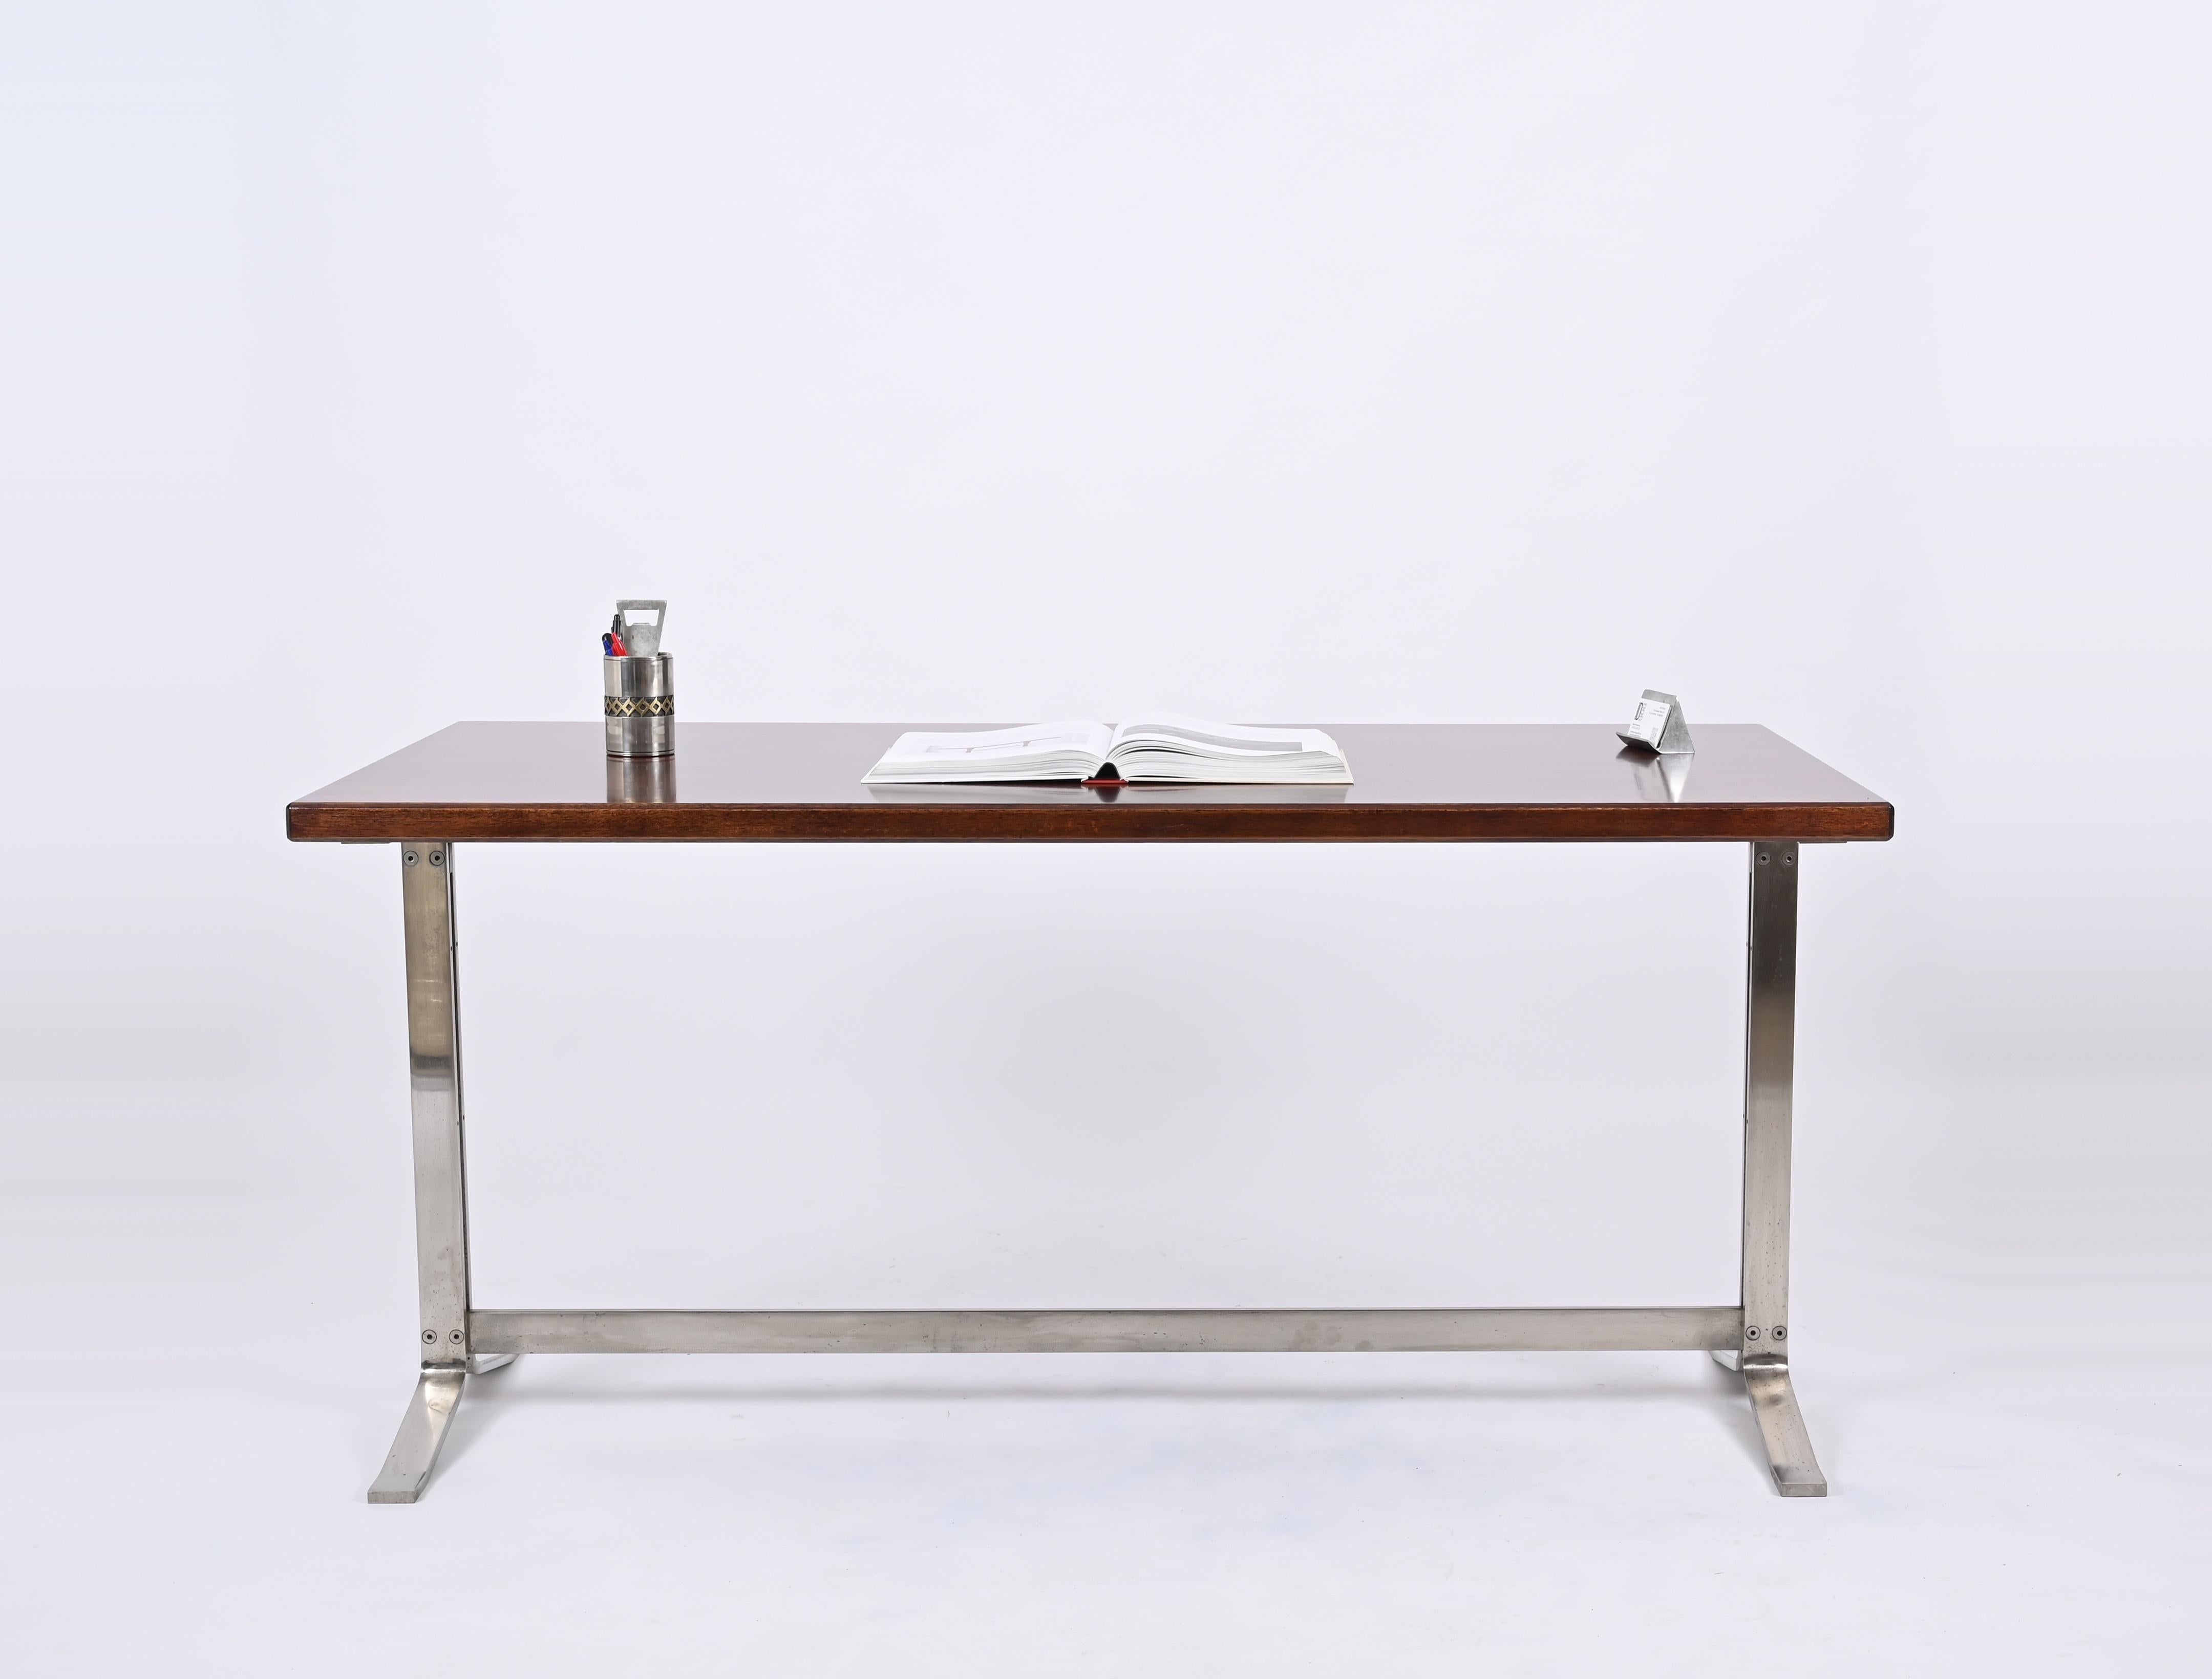 Midcentury Desk in Walnut and Steel by Moscatelli for Formanova, Italy, 1965 For Sale 6